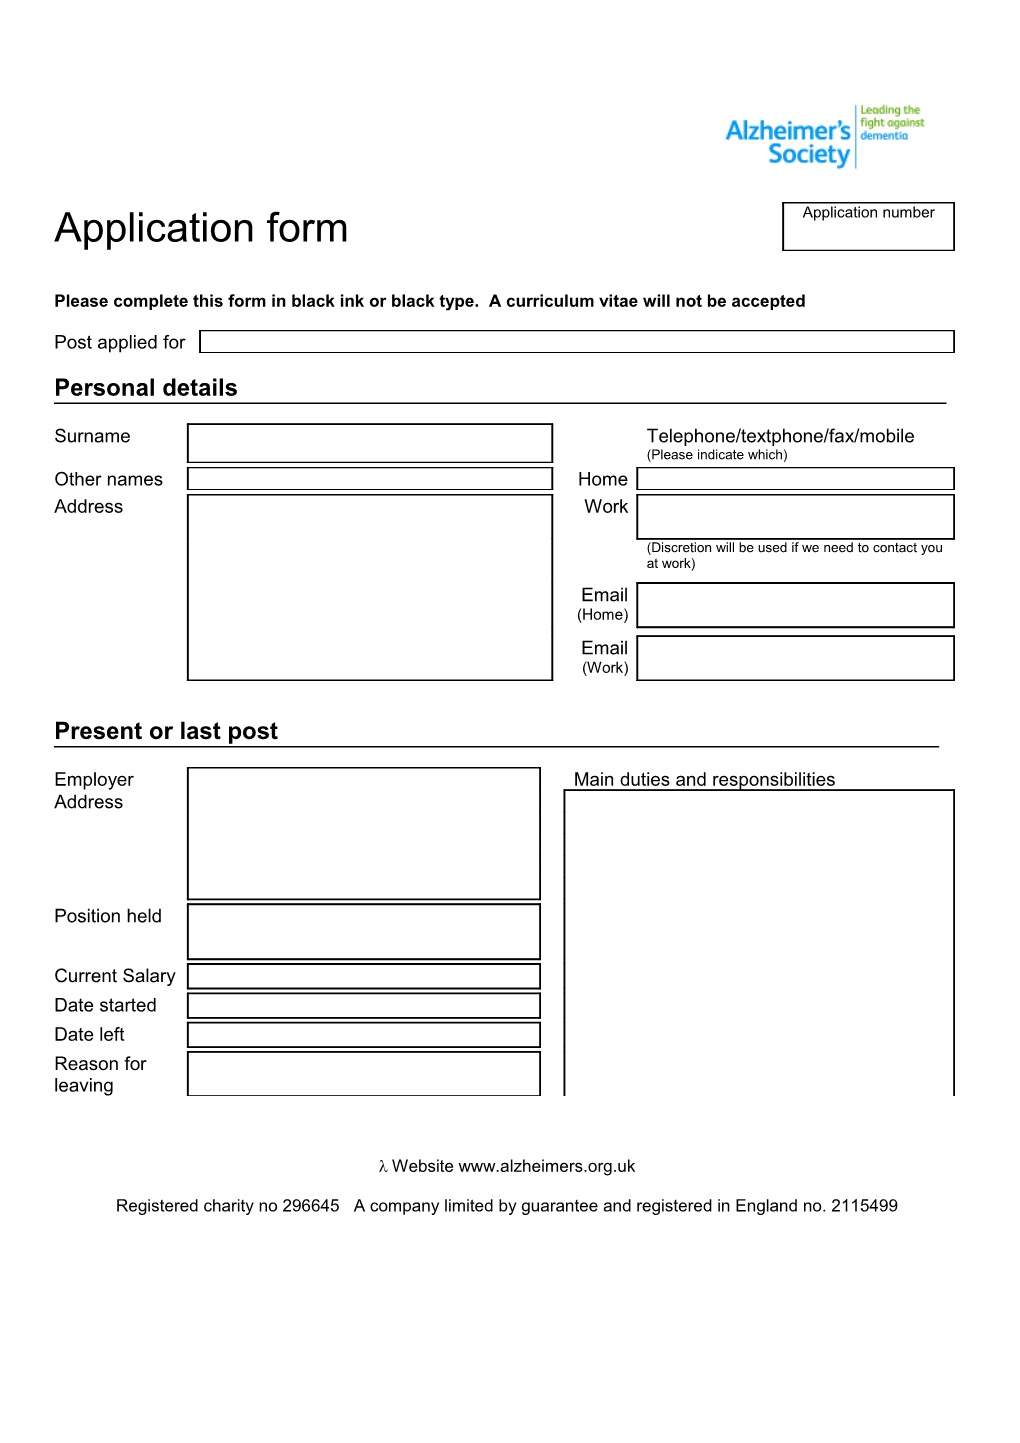 Application Form s85